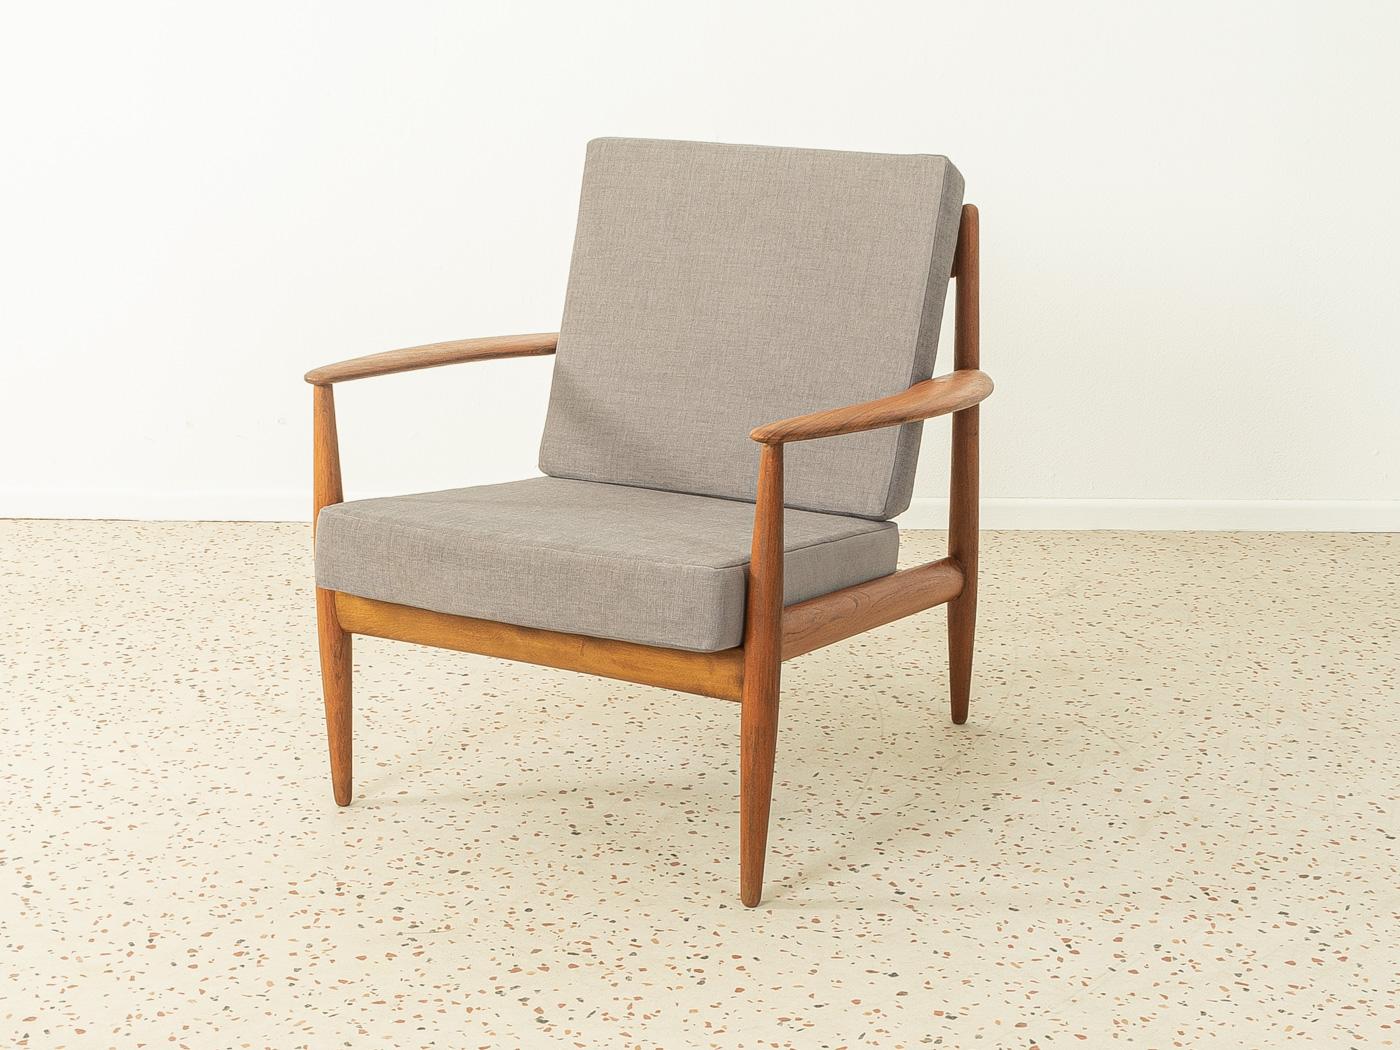 Rare armchair by Grete Jalk, model 118 for France & Daverkosen. The armchair comes from the first series from 1955. High quality solid teak wood frame. The seat and backrest have been newly upholstered and covered with a high-quality gray upholstery